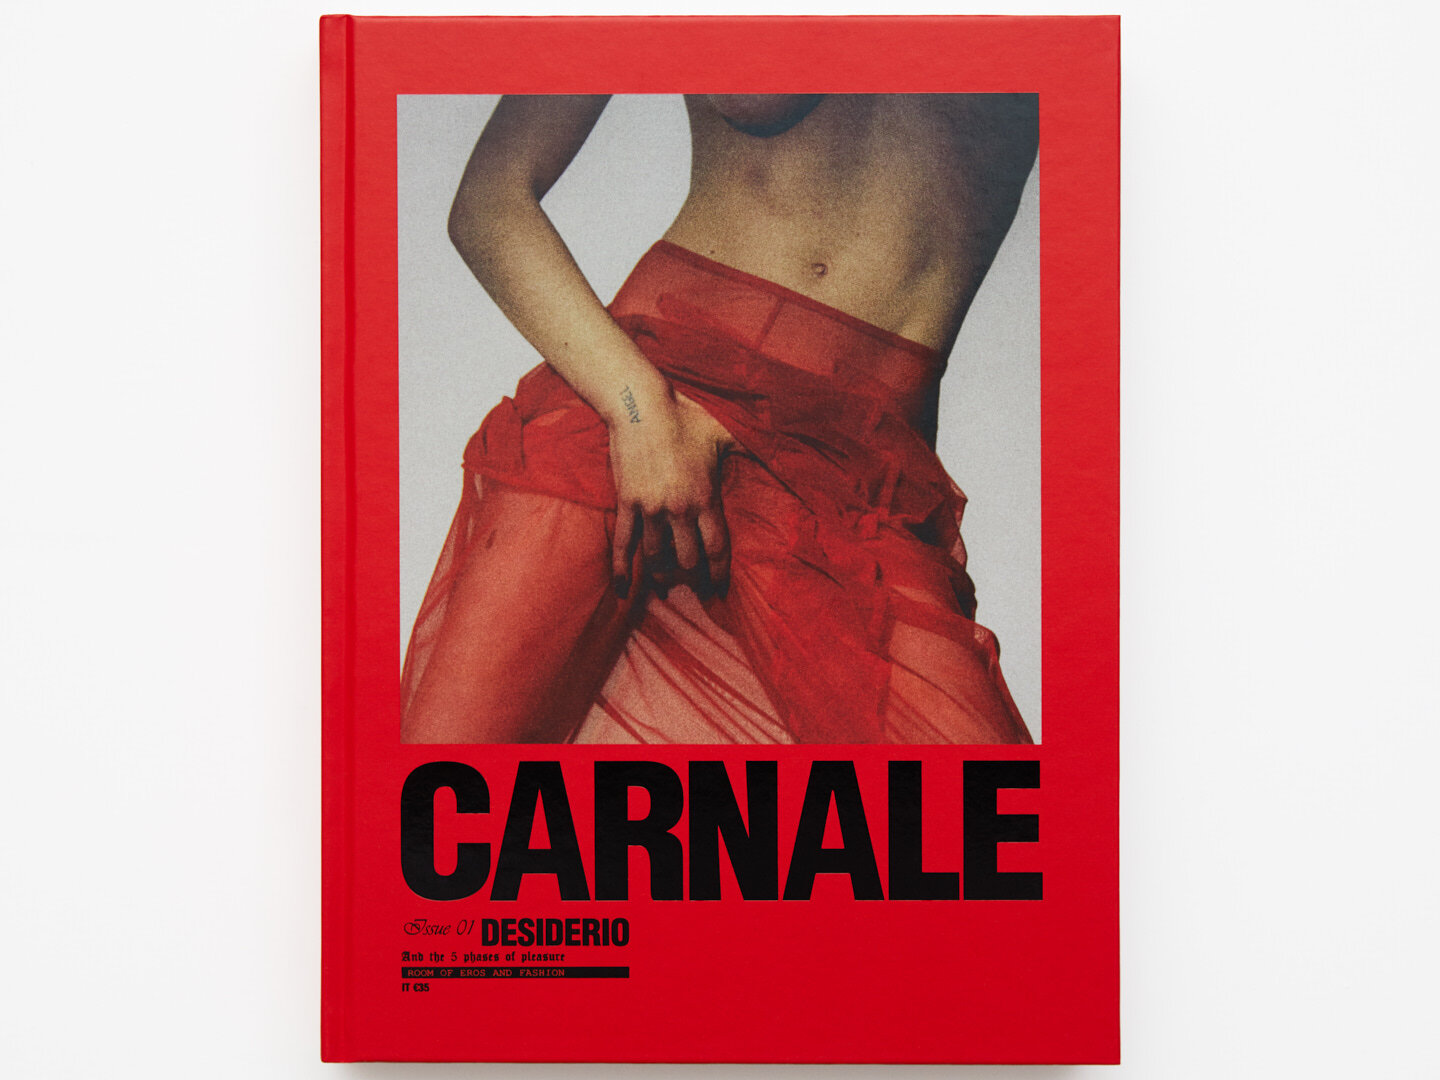  CARNALE - Issue 01 DESIDERO  and the 5 phases of pleasure  ROOM OF EROS AND FASHION 